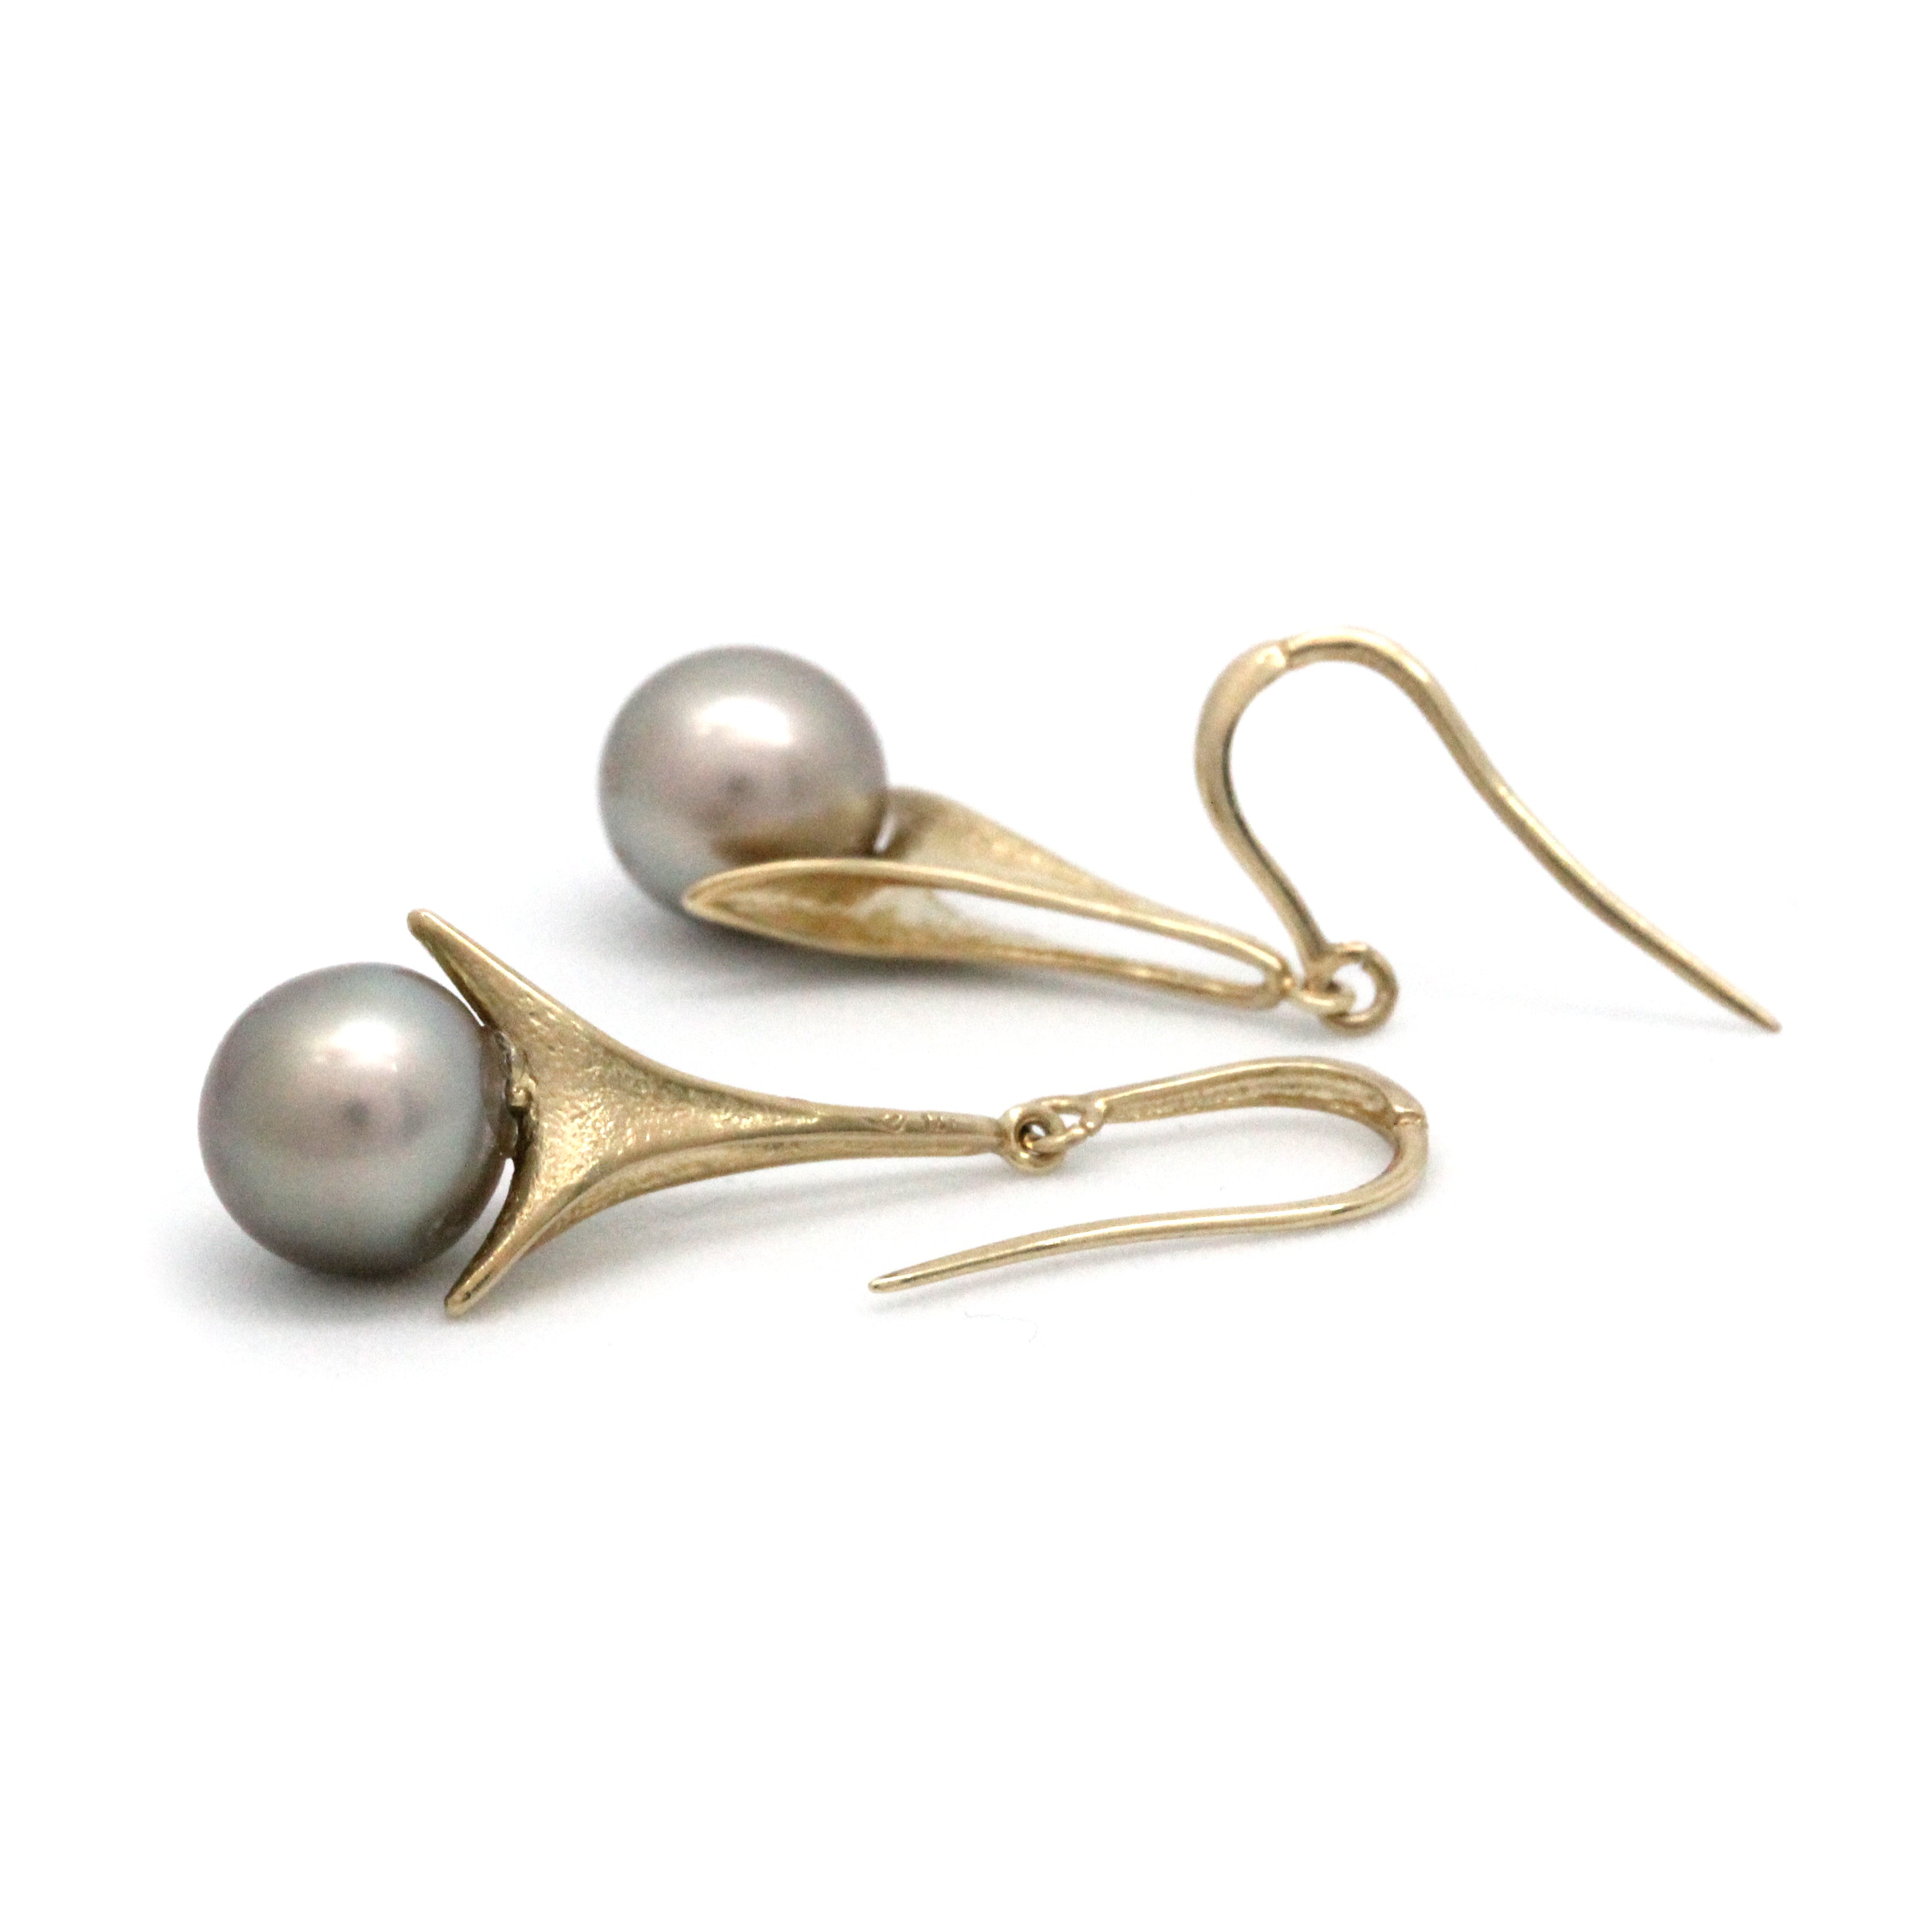 Hanging Earrings on 14K Yellow Gold with Sea of Cortez Pearls